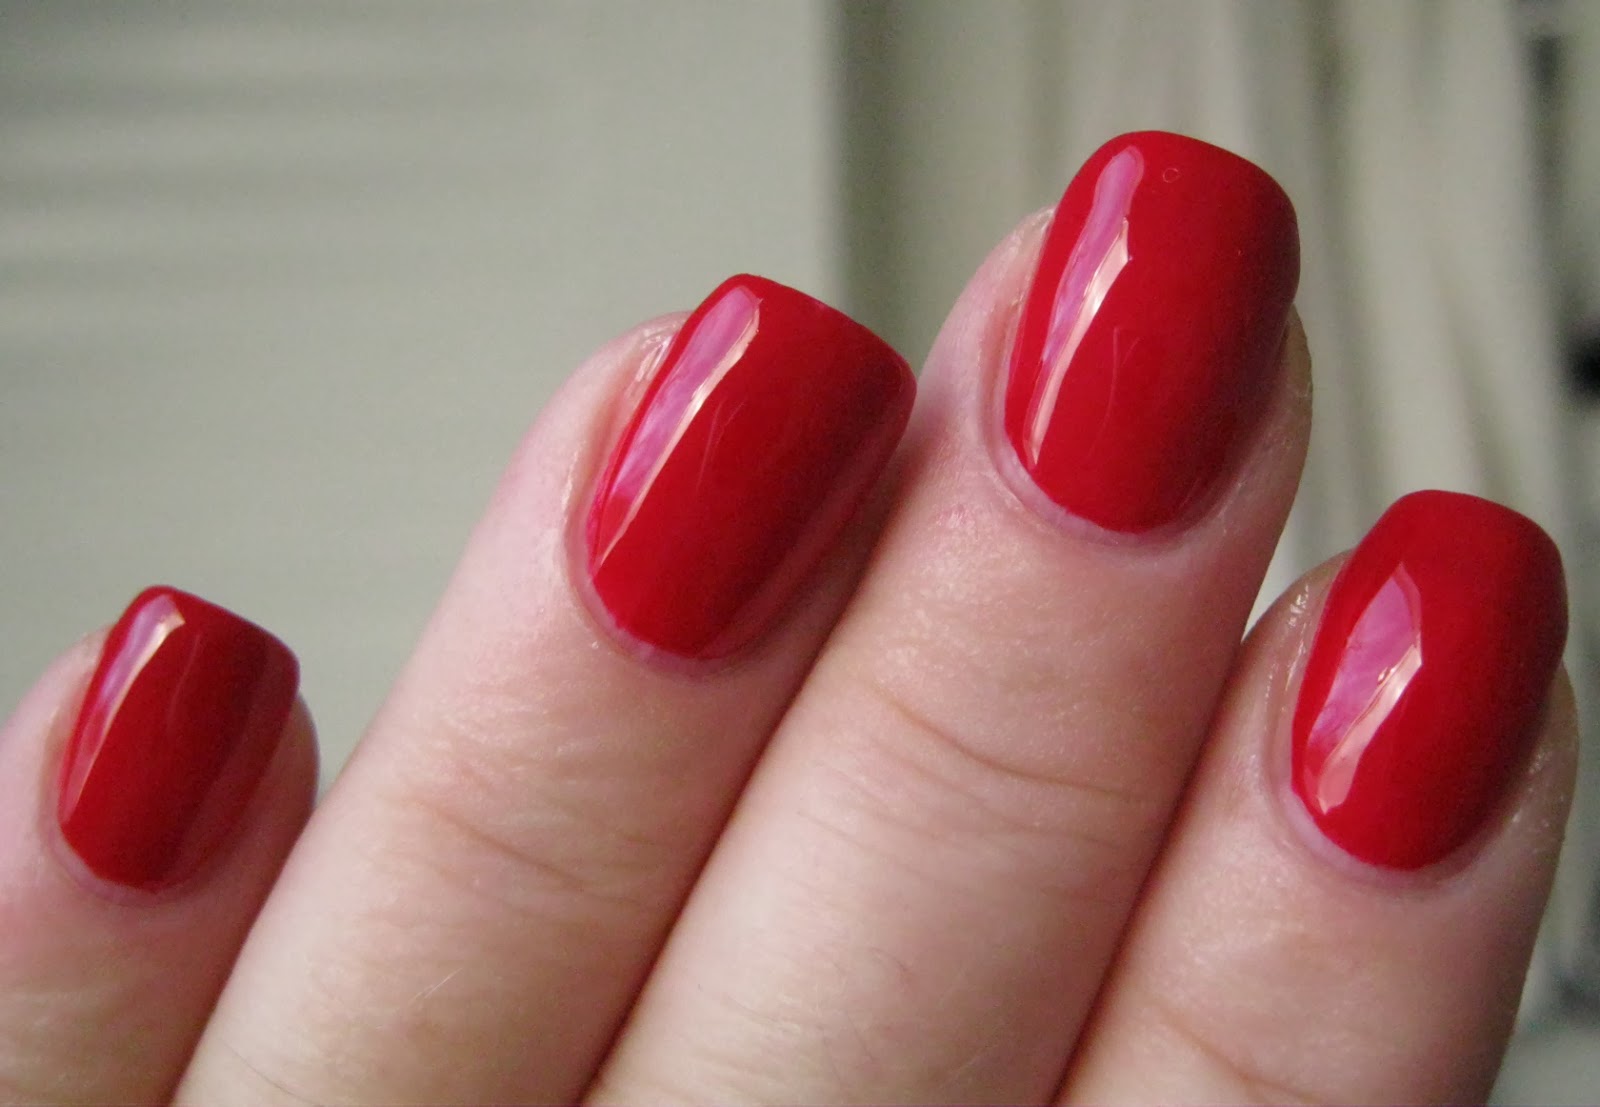 7. Butter London Nail Lacquer in "Come to Bed Red" - wide 8